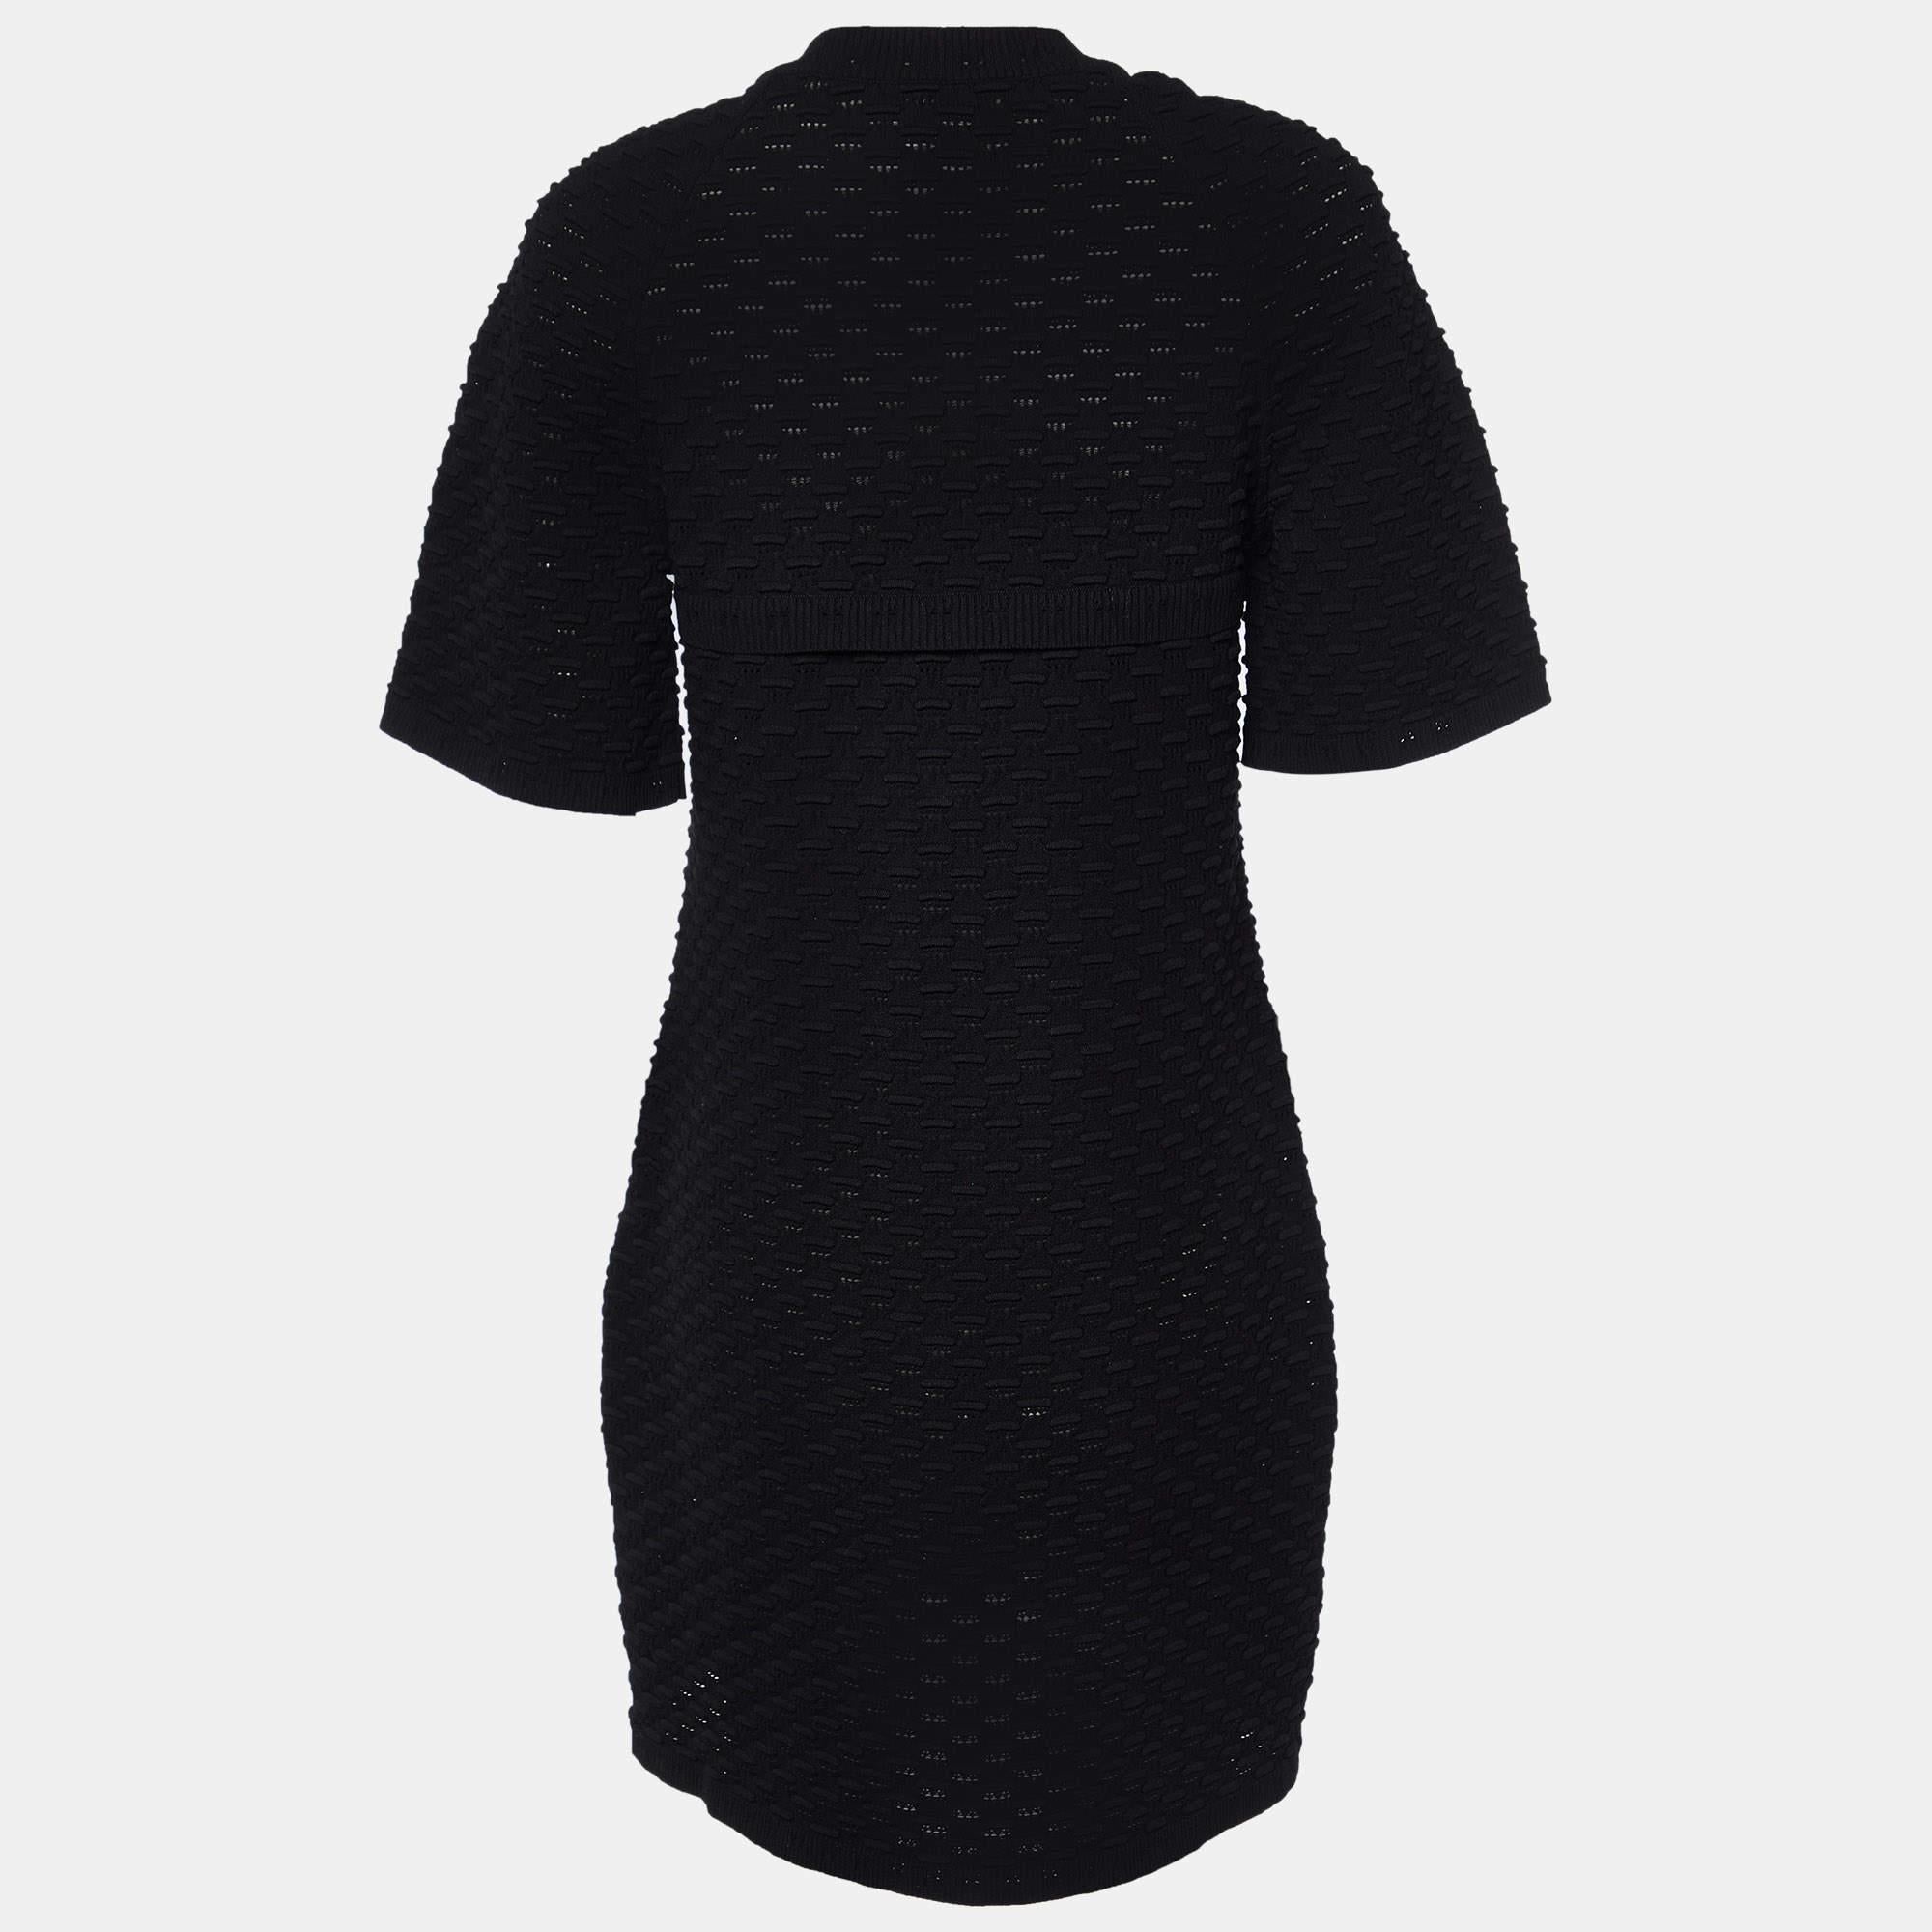 This well-made designer dress is a celebration of classic design and enduring style. Meticulous attention to detail and premium materials ensure comfort and a flattering silhouette. Its classic design transcends fashion trends, becoming a wardrobe